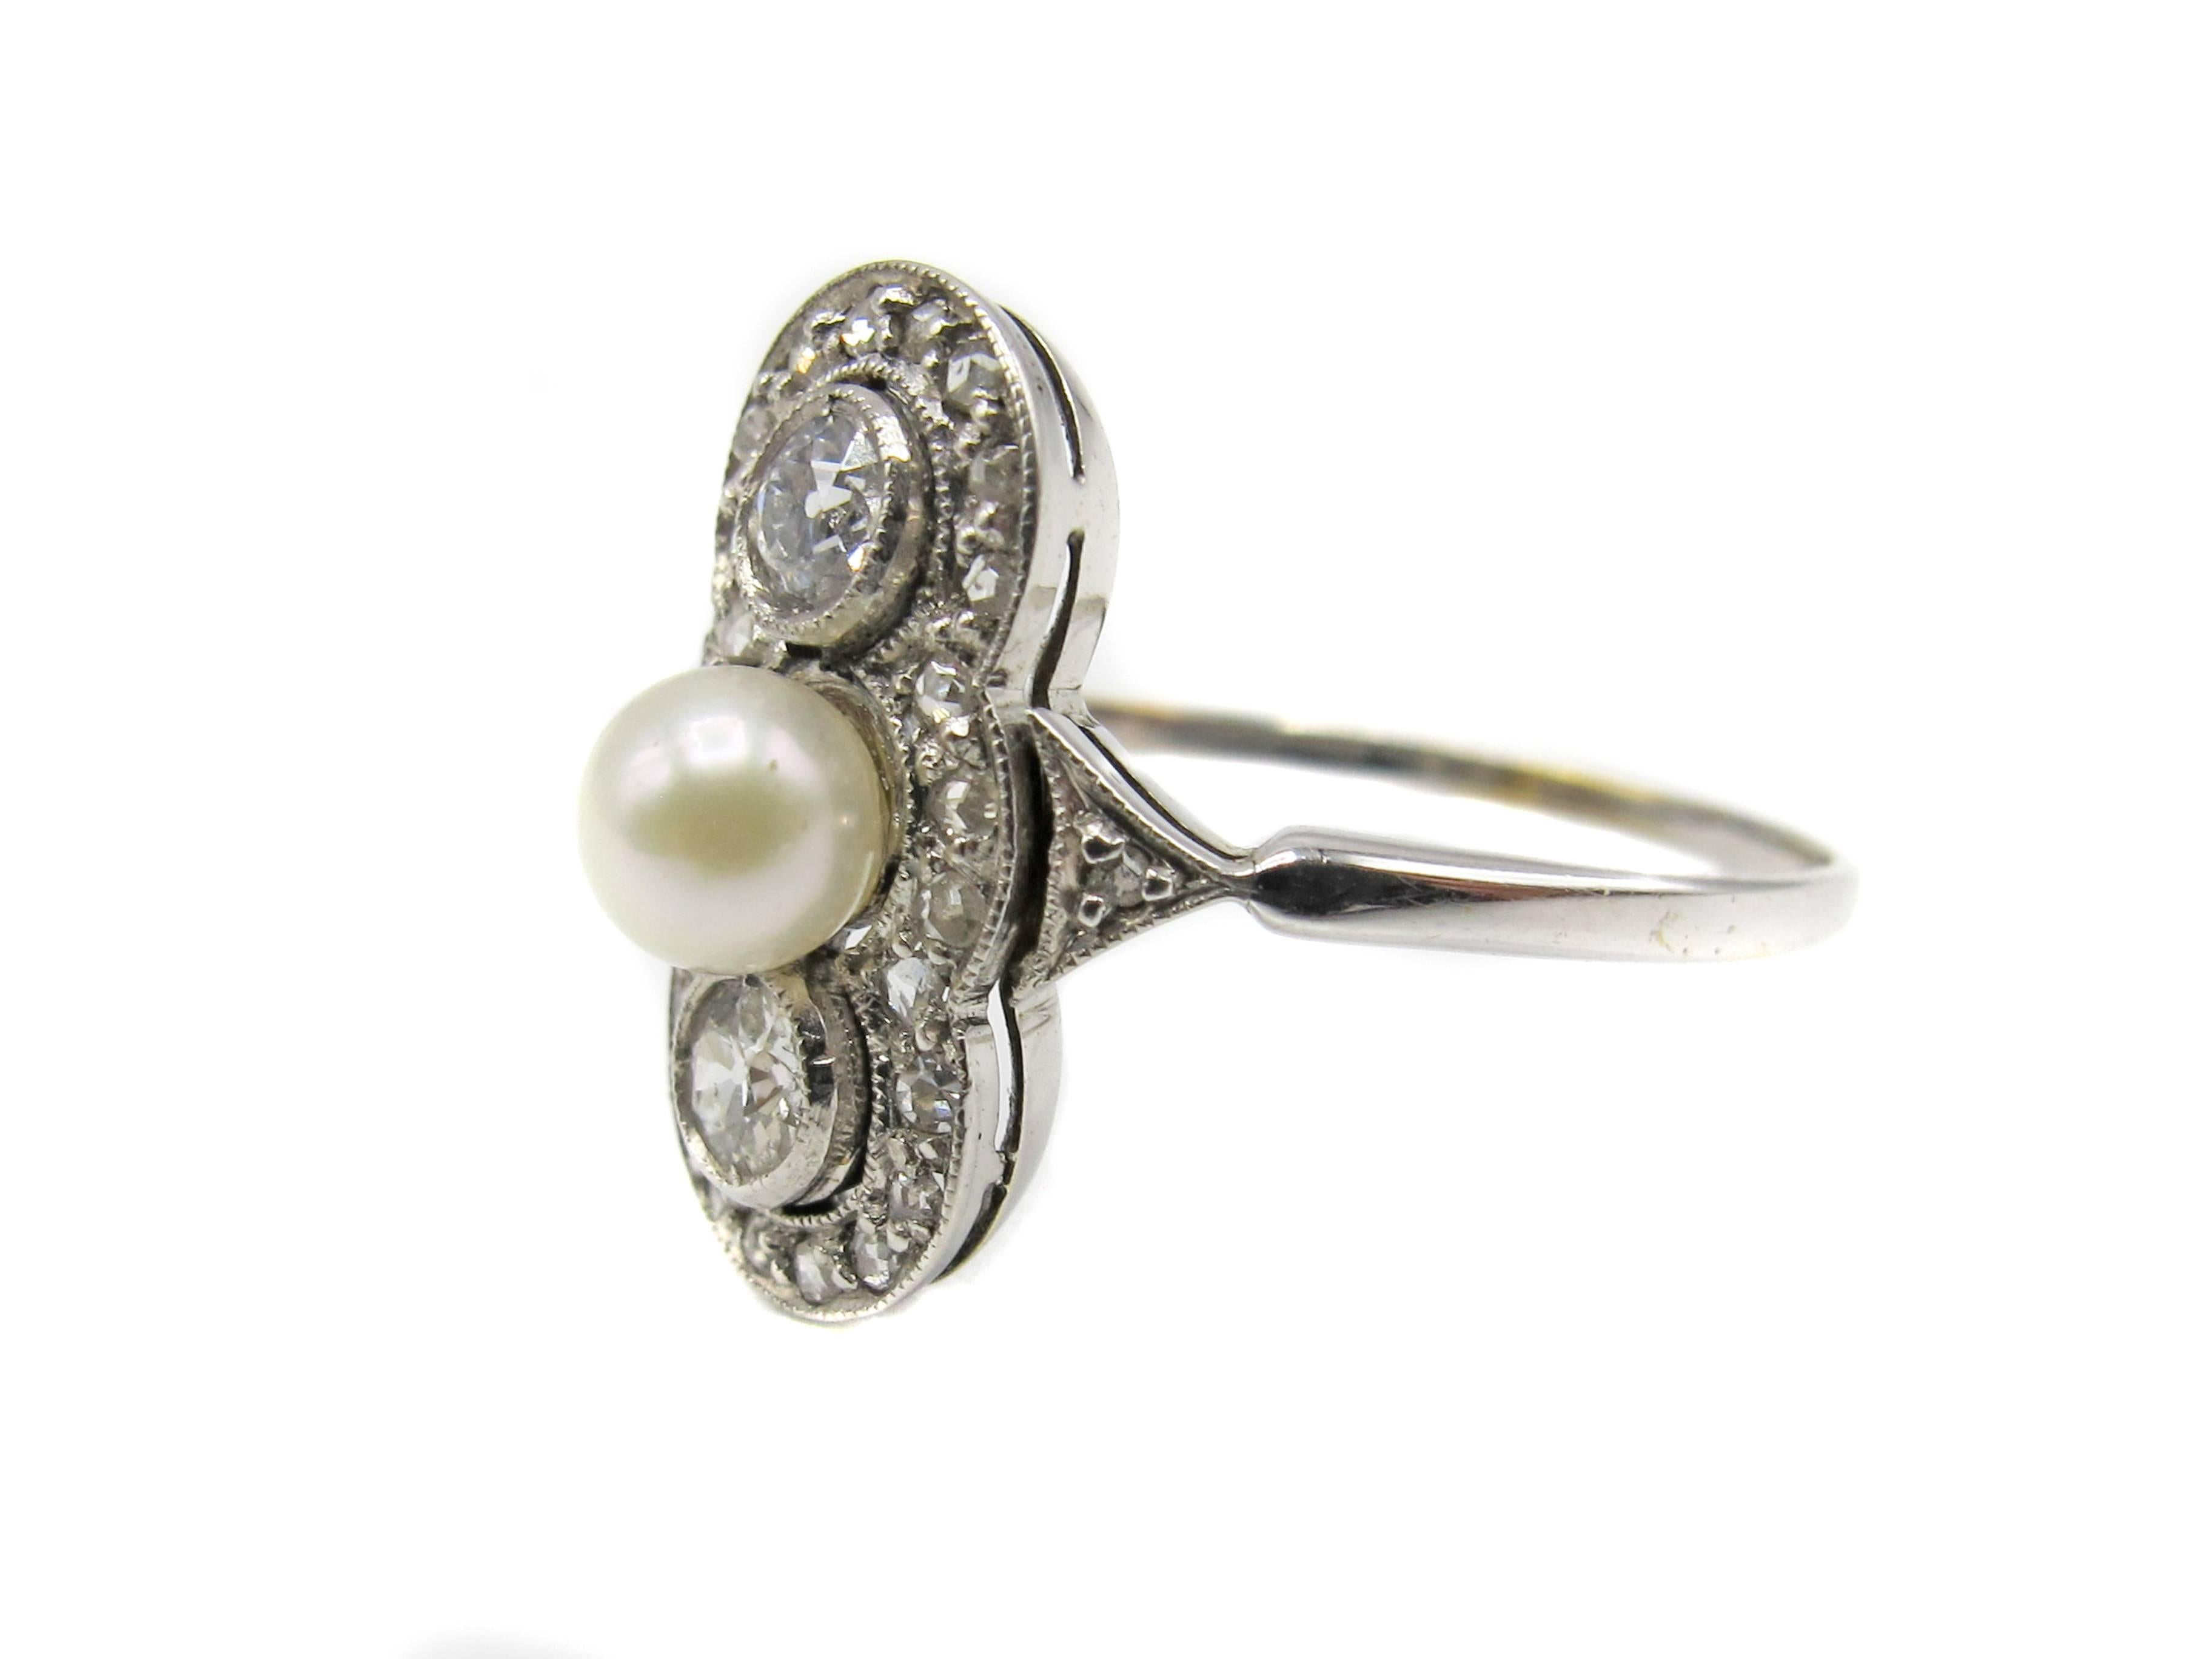 Charming Art-Deco 14 karat white gold diamond and pearl ring, centrally set with one white round pearl and flanked by 2 Old European Cut diamonds. Surrounding these, in a mill-grain bezel are 24 rose cut diamonds and another rose cut diamond on the